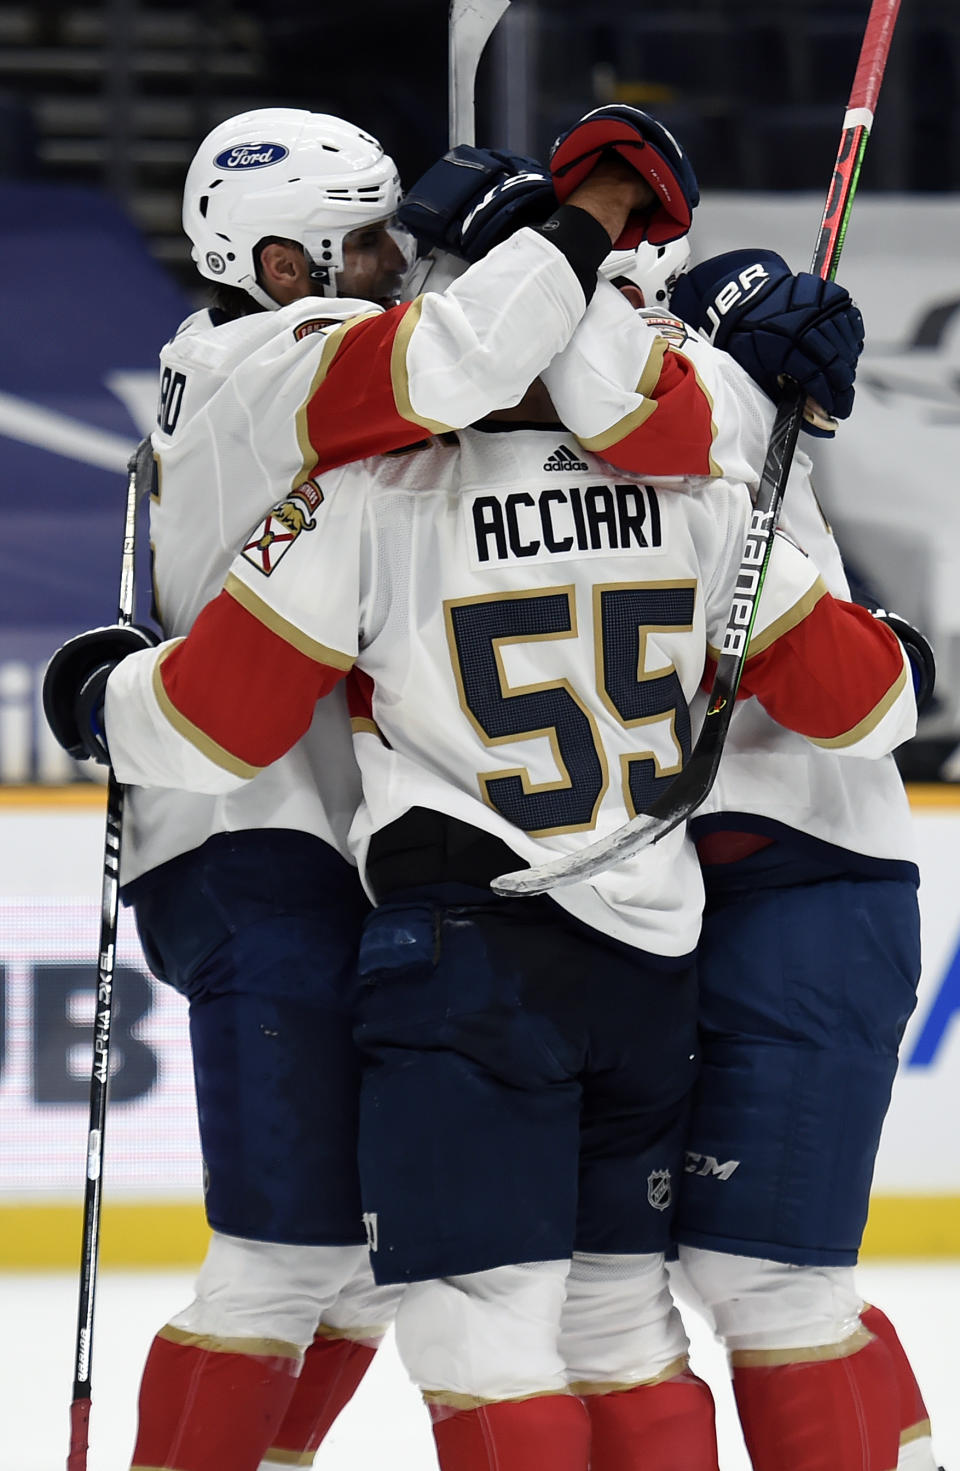 Florida Panthers center Noel Acciari (55) celebrates with teammates after his third goal for a hat trick against the Nashville Predators during the third period of an NHL hockey game Saturday, March 6, 2021, in Nashville, Tenn. (AP Photo/Mark Zaleski)